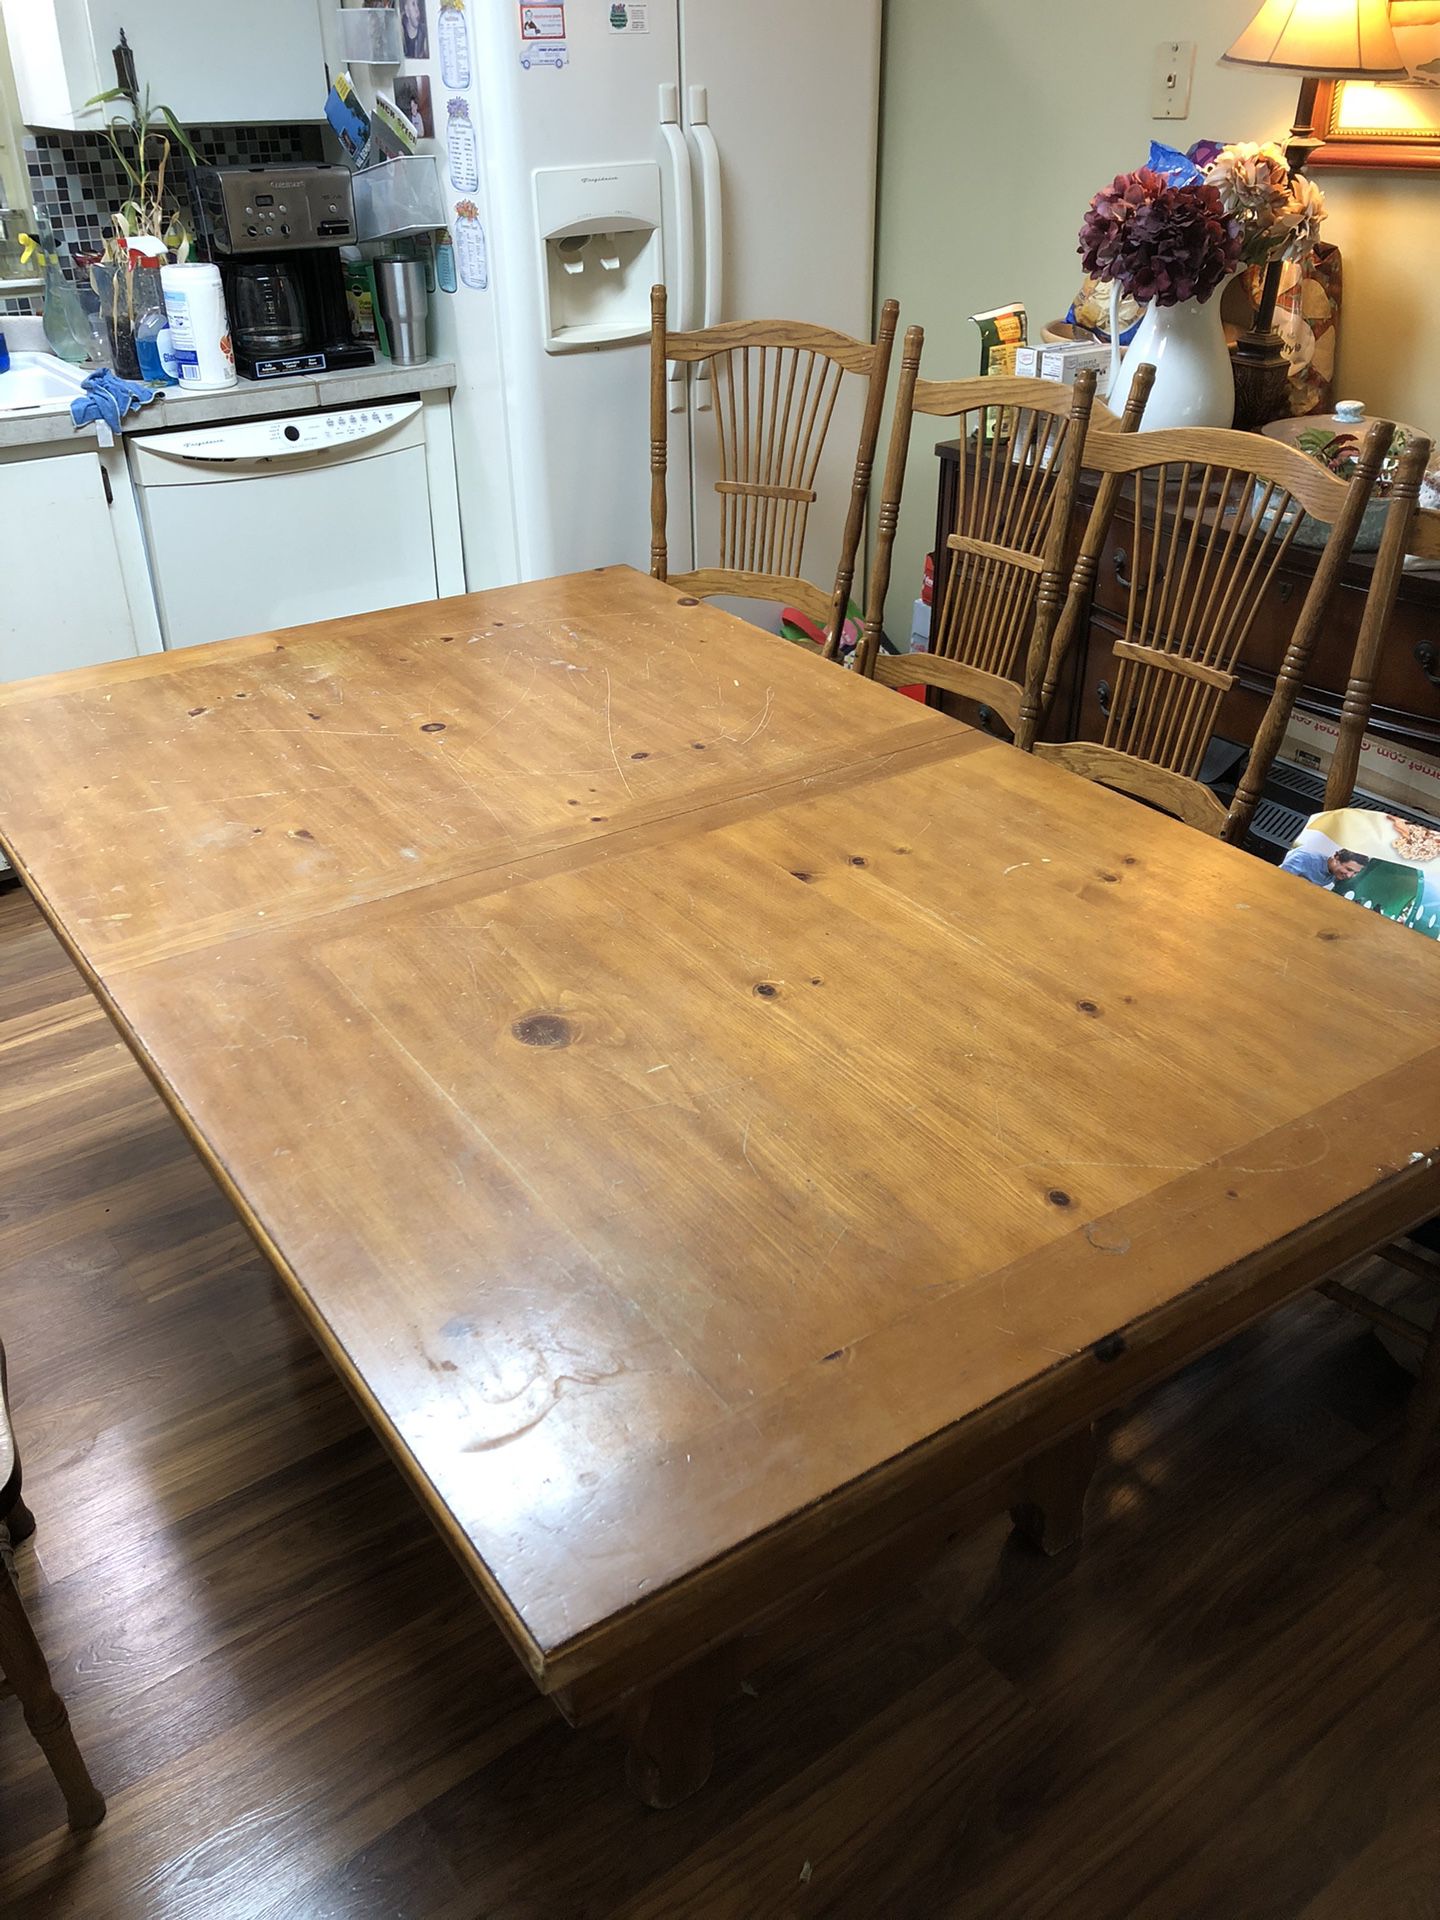 Wooden Dining Room Table with Leaf, Seats 8